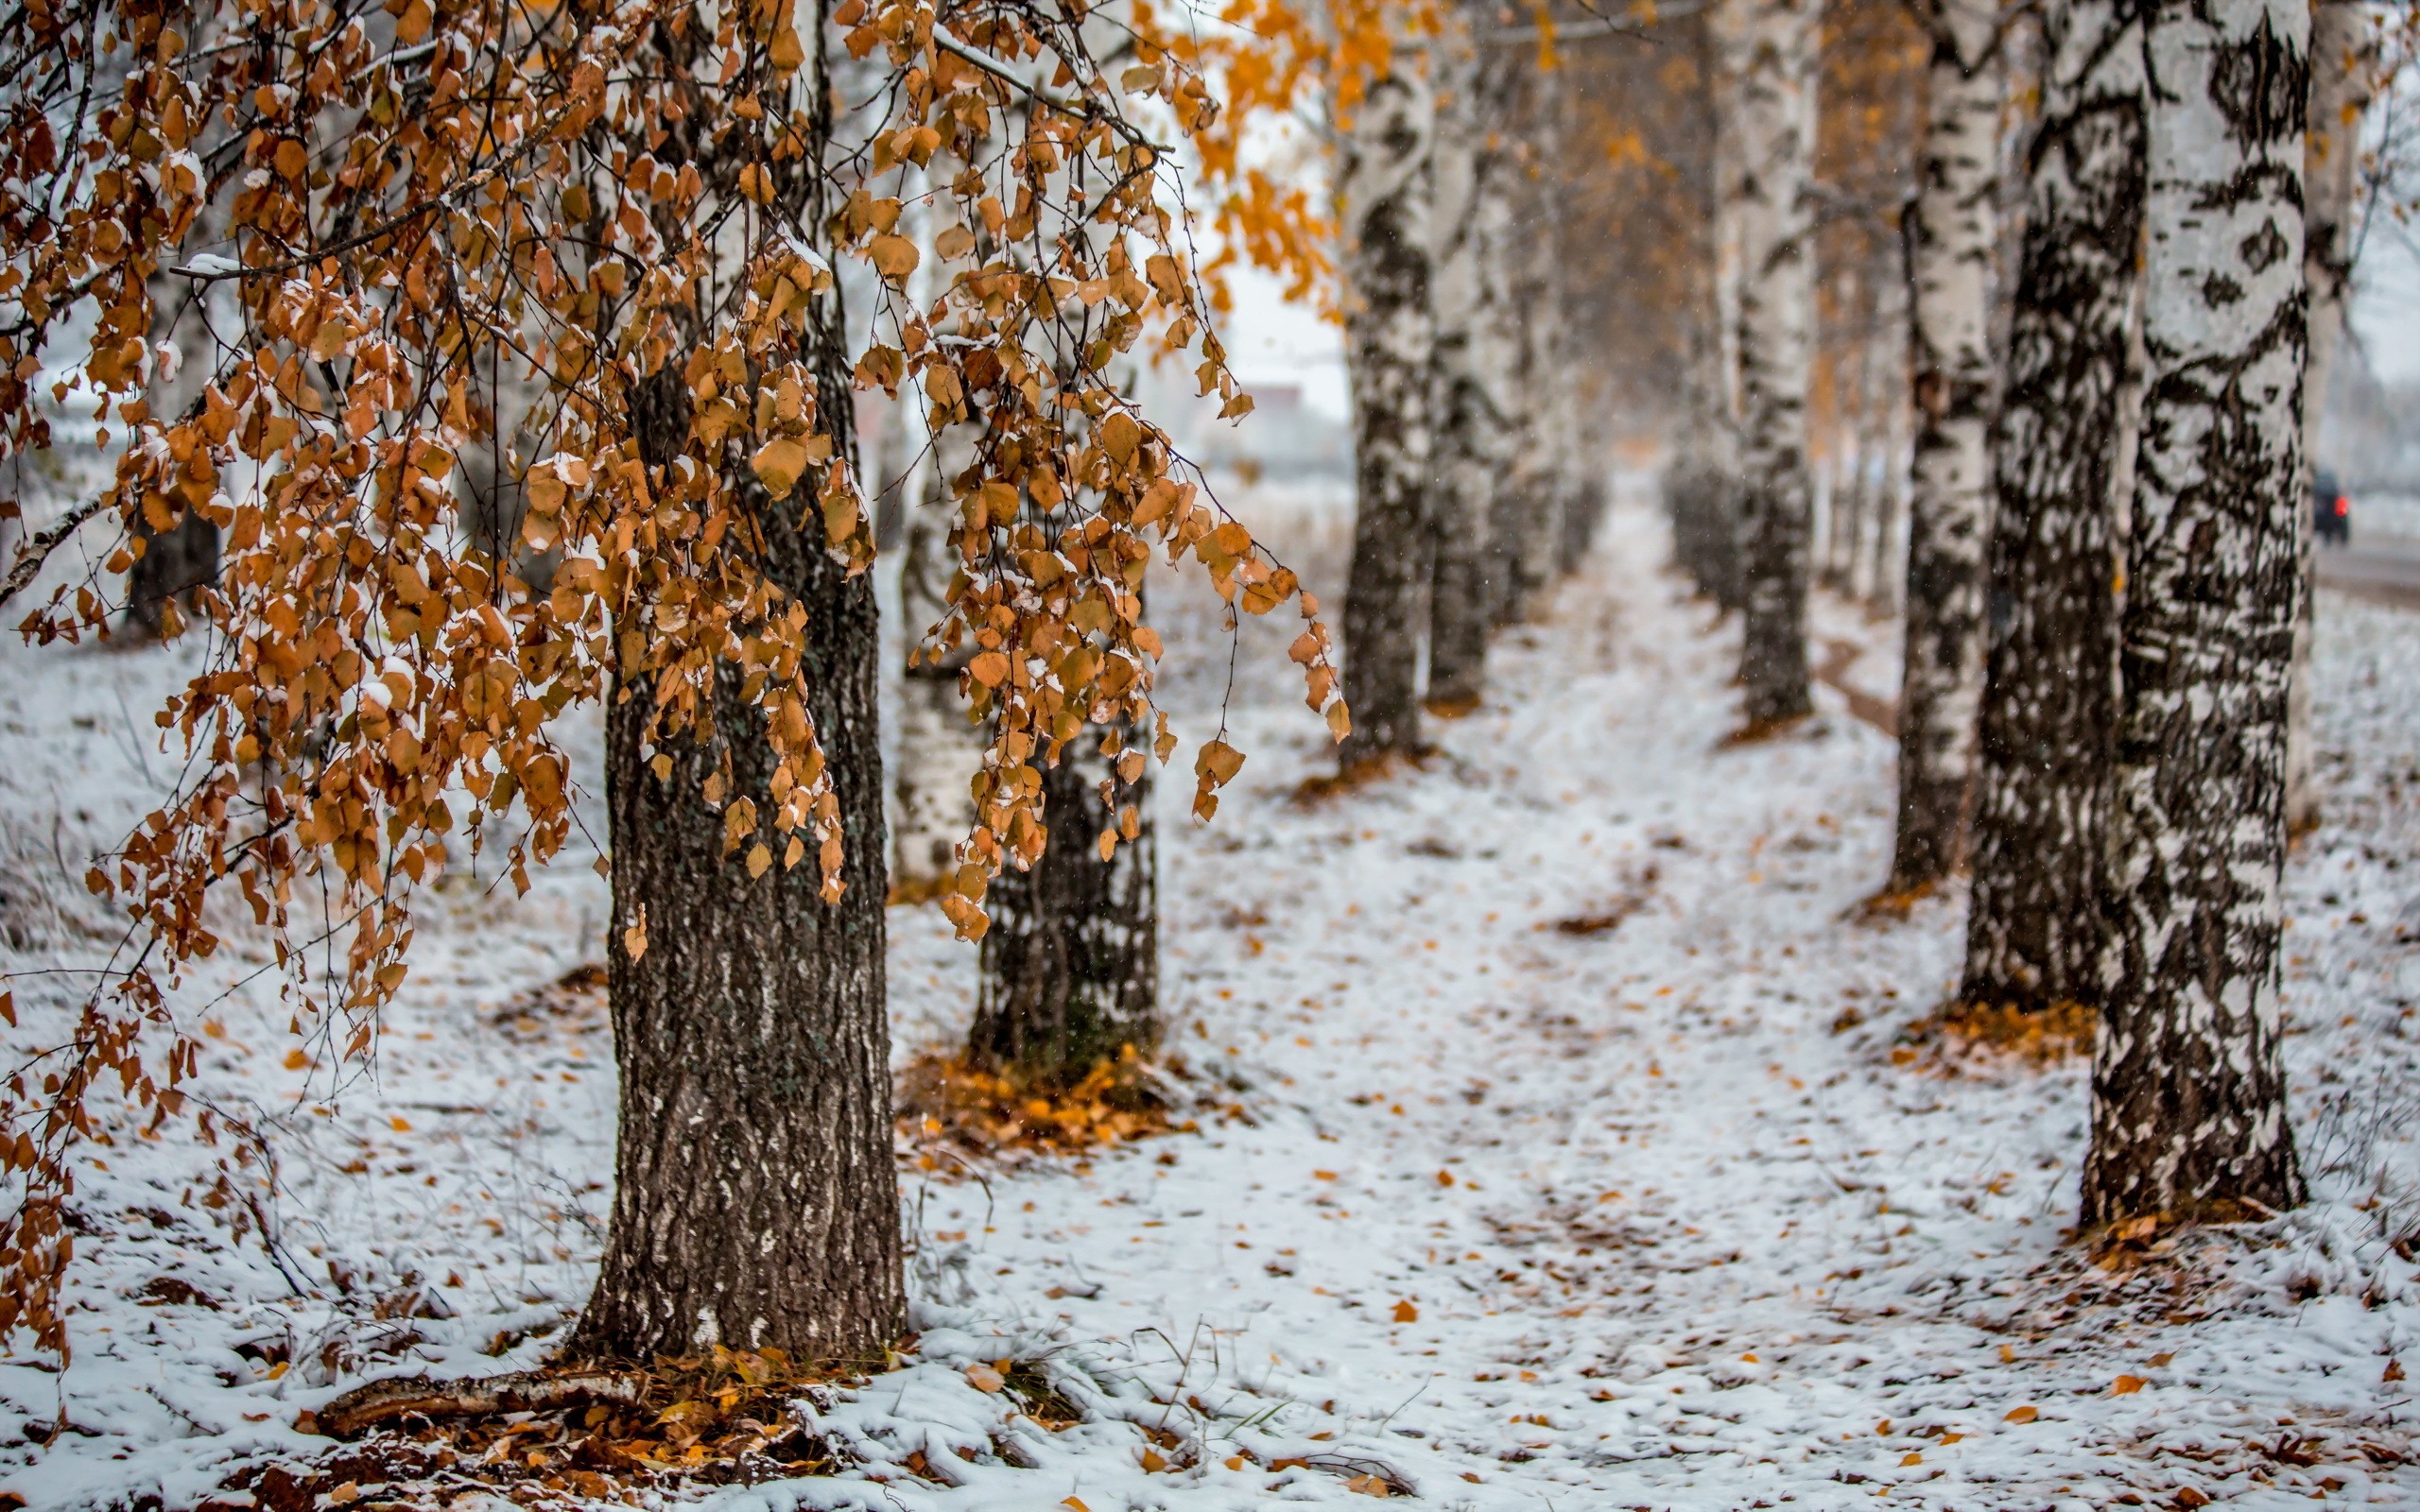 General 2560x1600 trees snow birch leaves outdoors cold